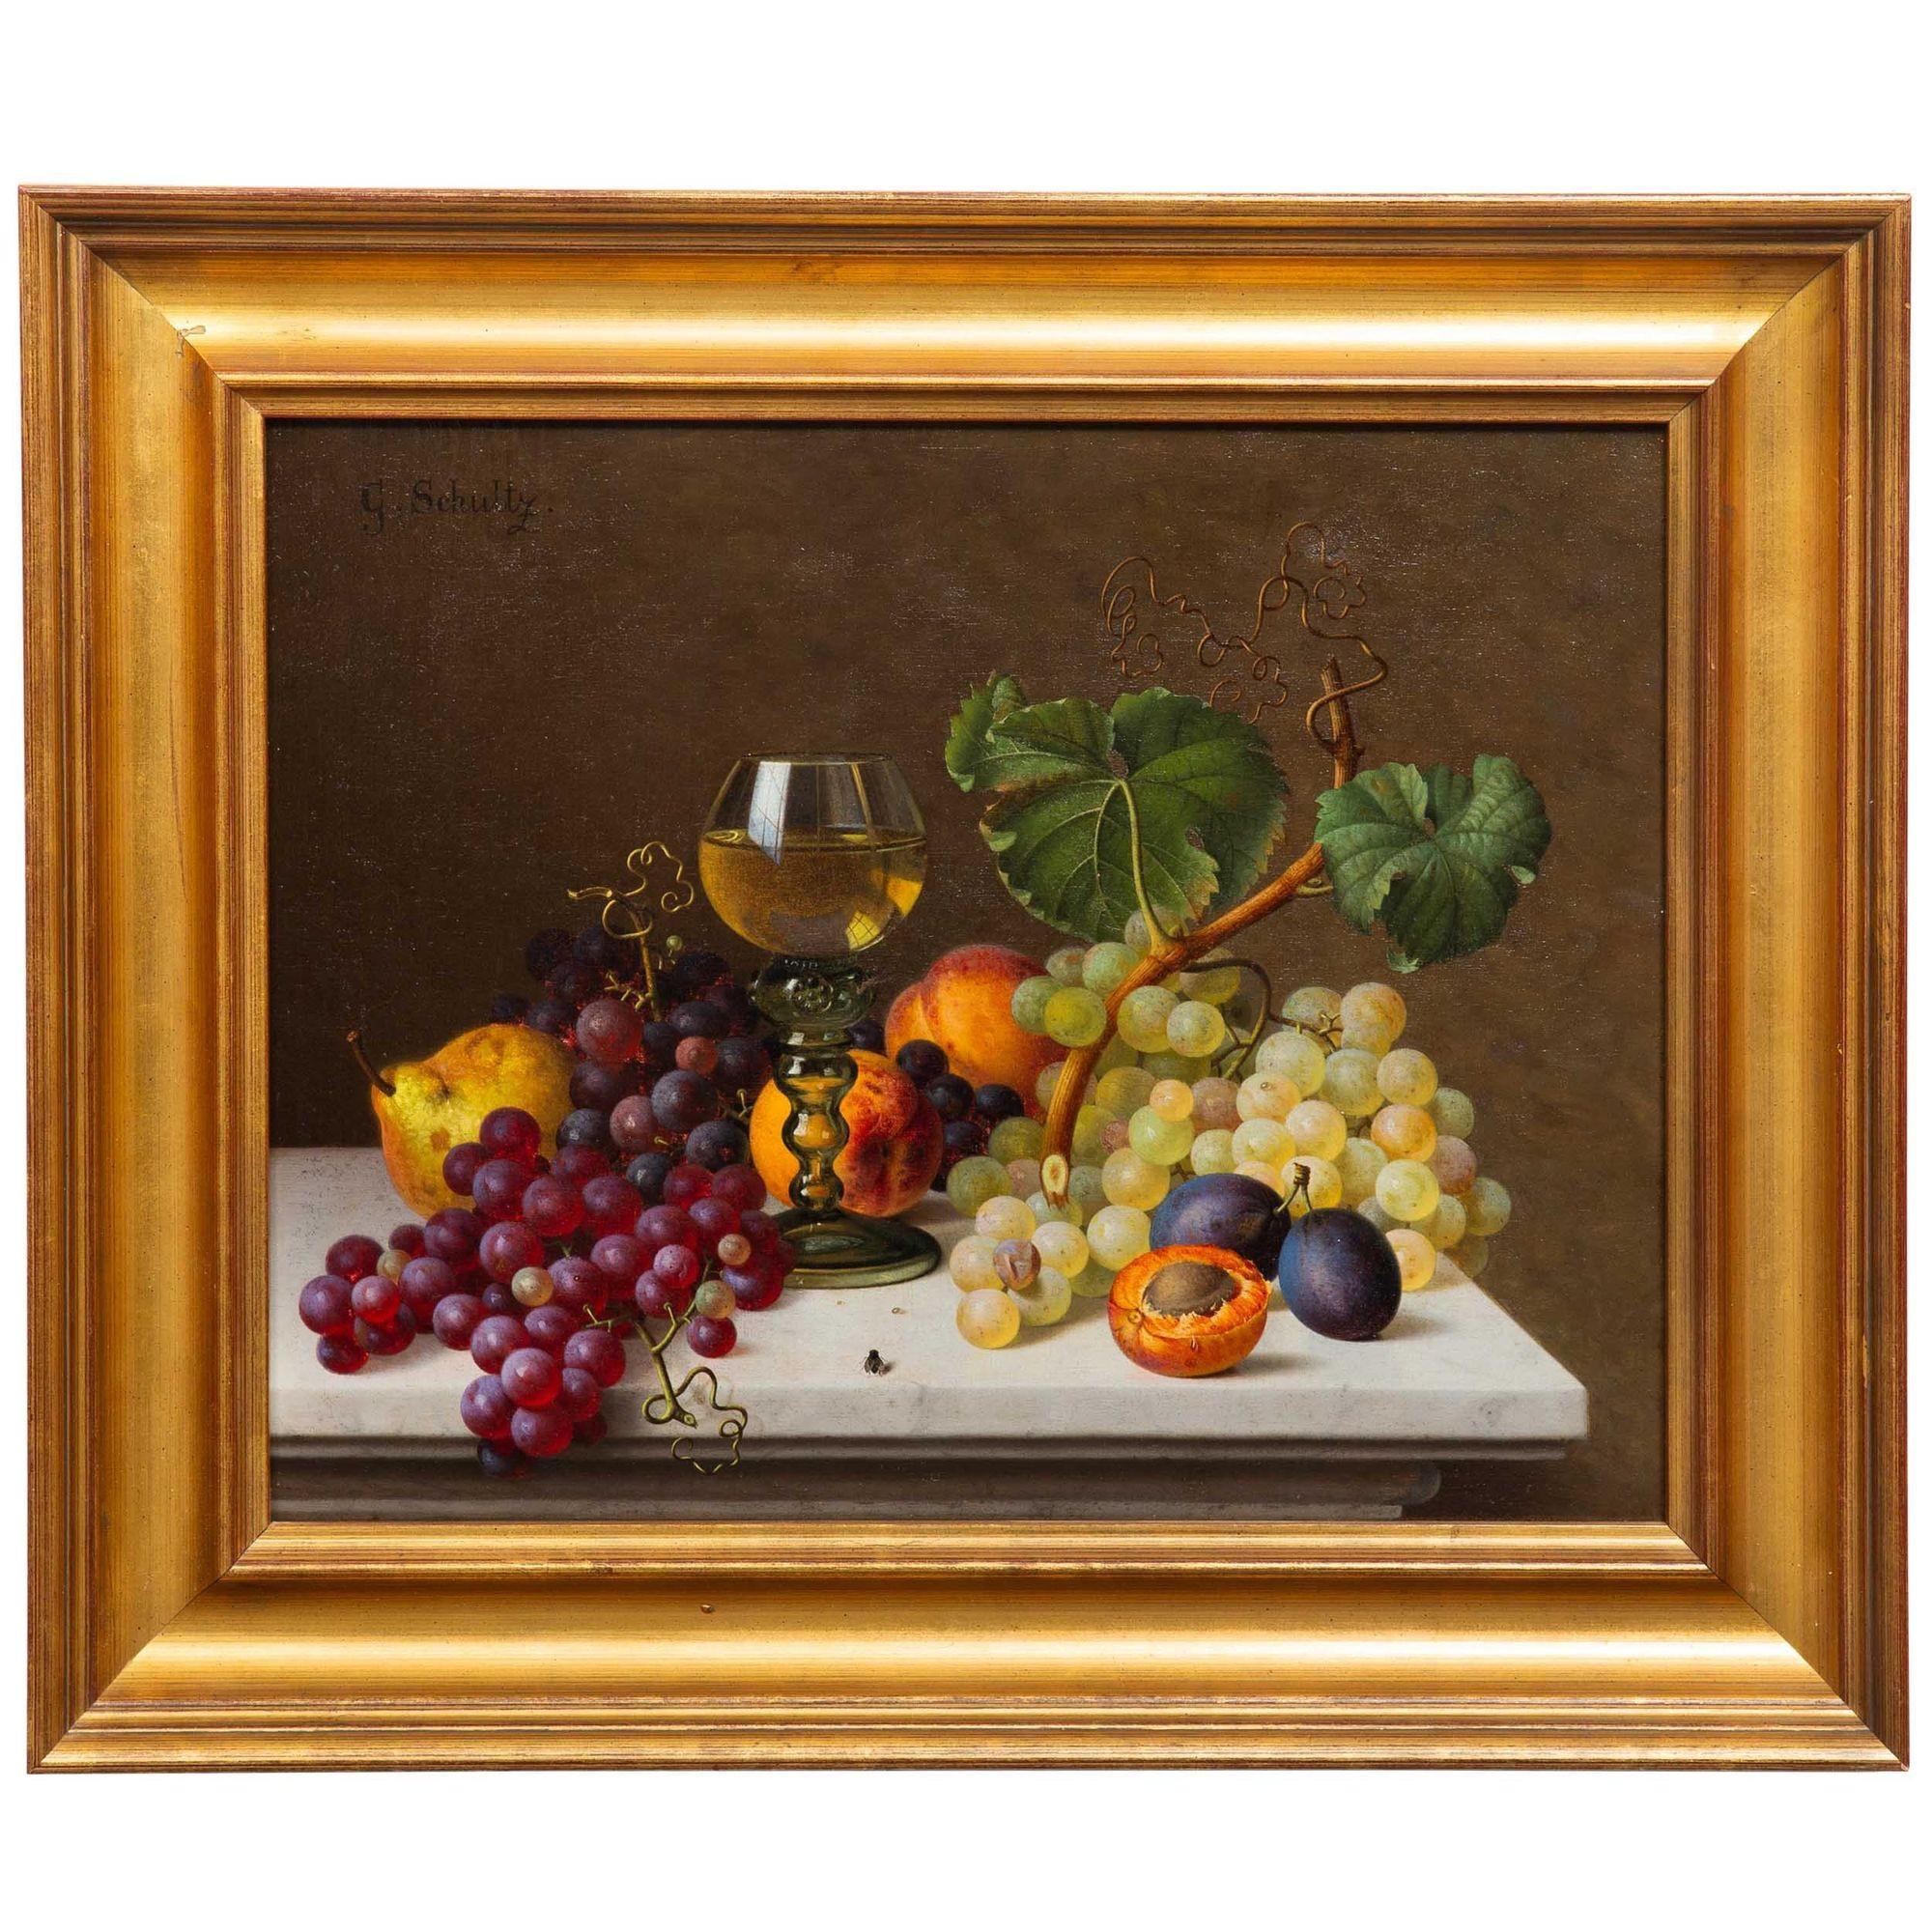 GOTTFRIED SCHULTZ
German, 1842-1919

Still-Life with Fruits and Wine on a Marble Surface with a Small Fly

Oil on linen  Signed upper left 